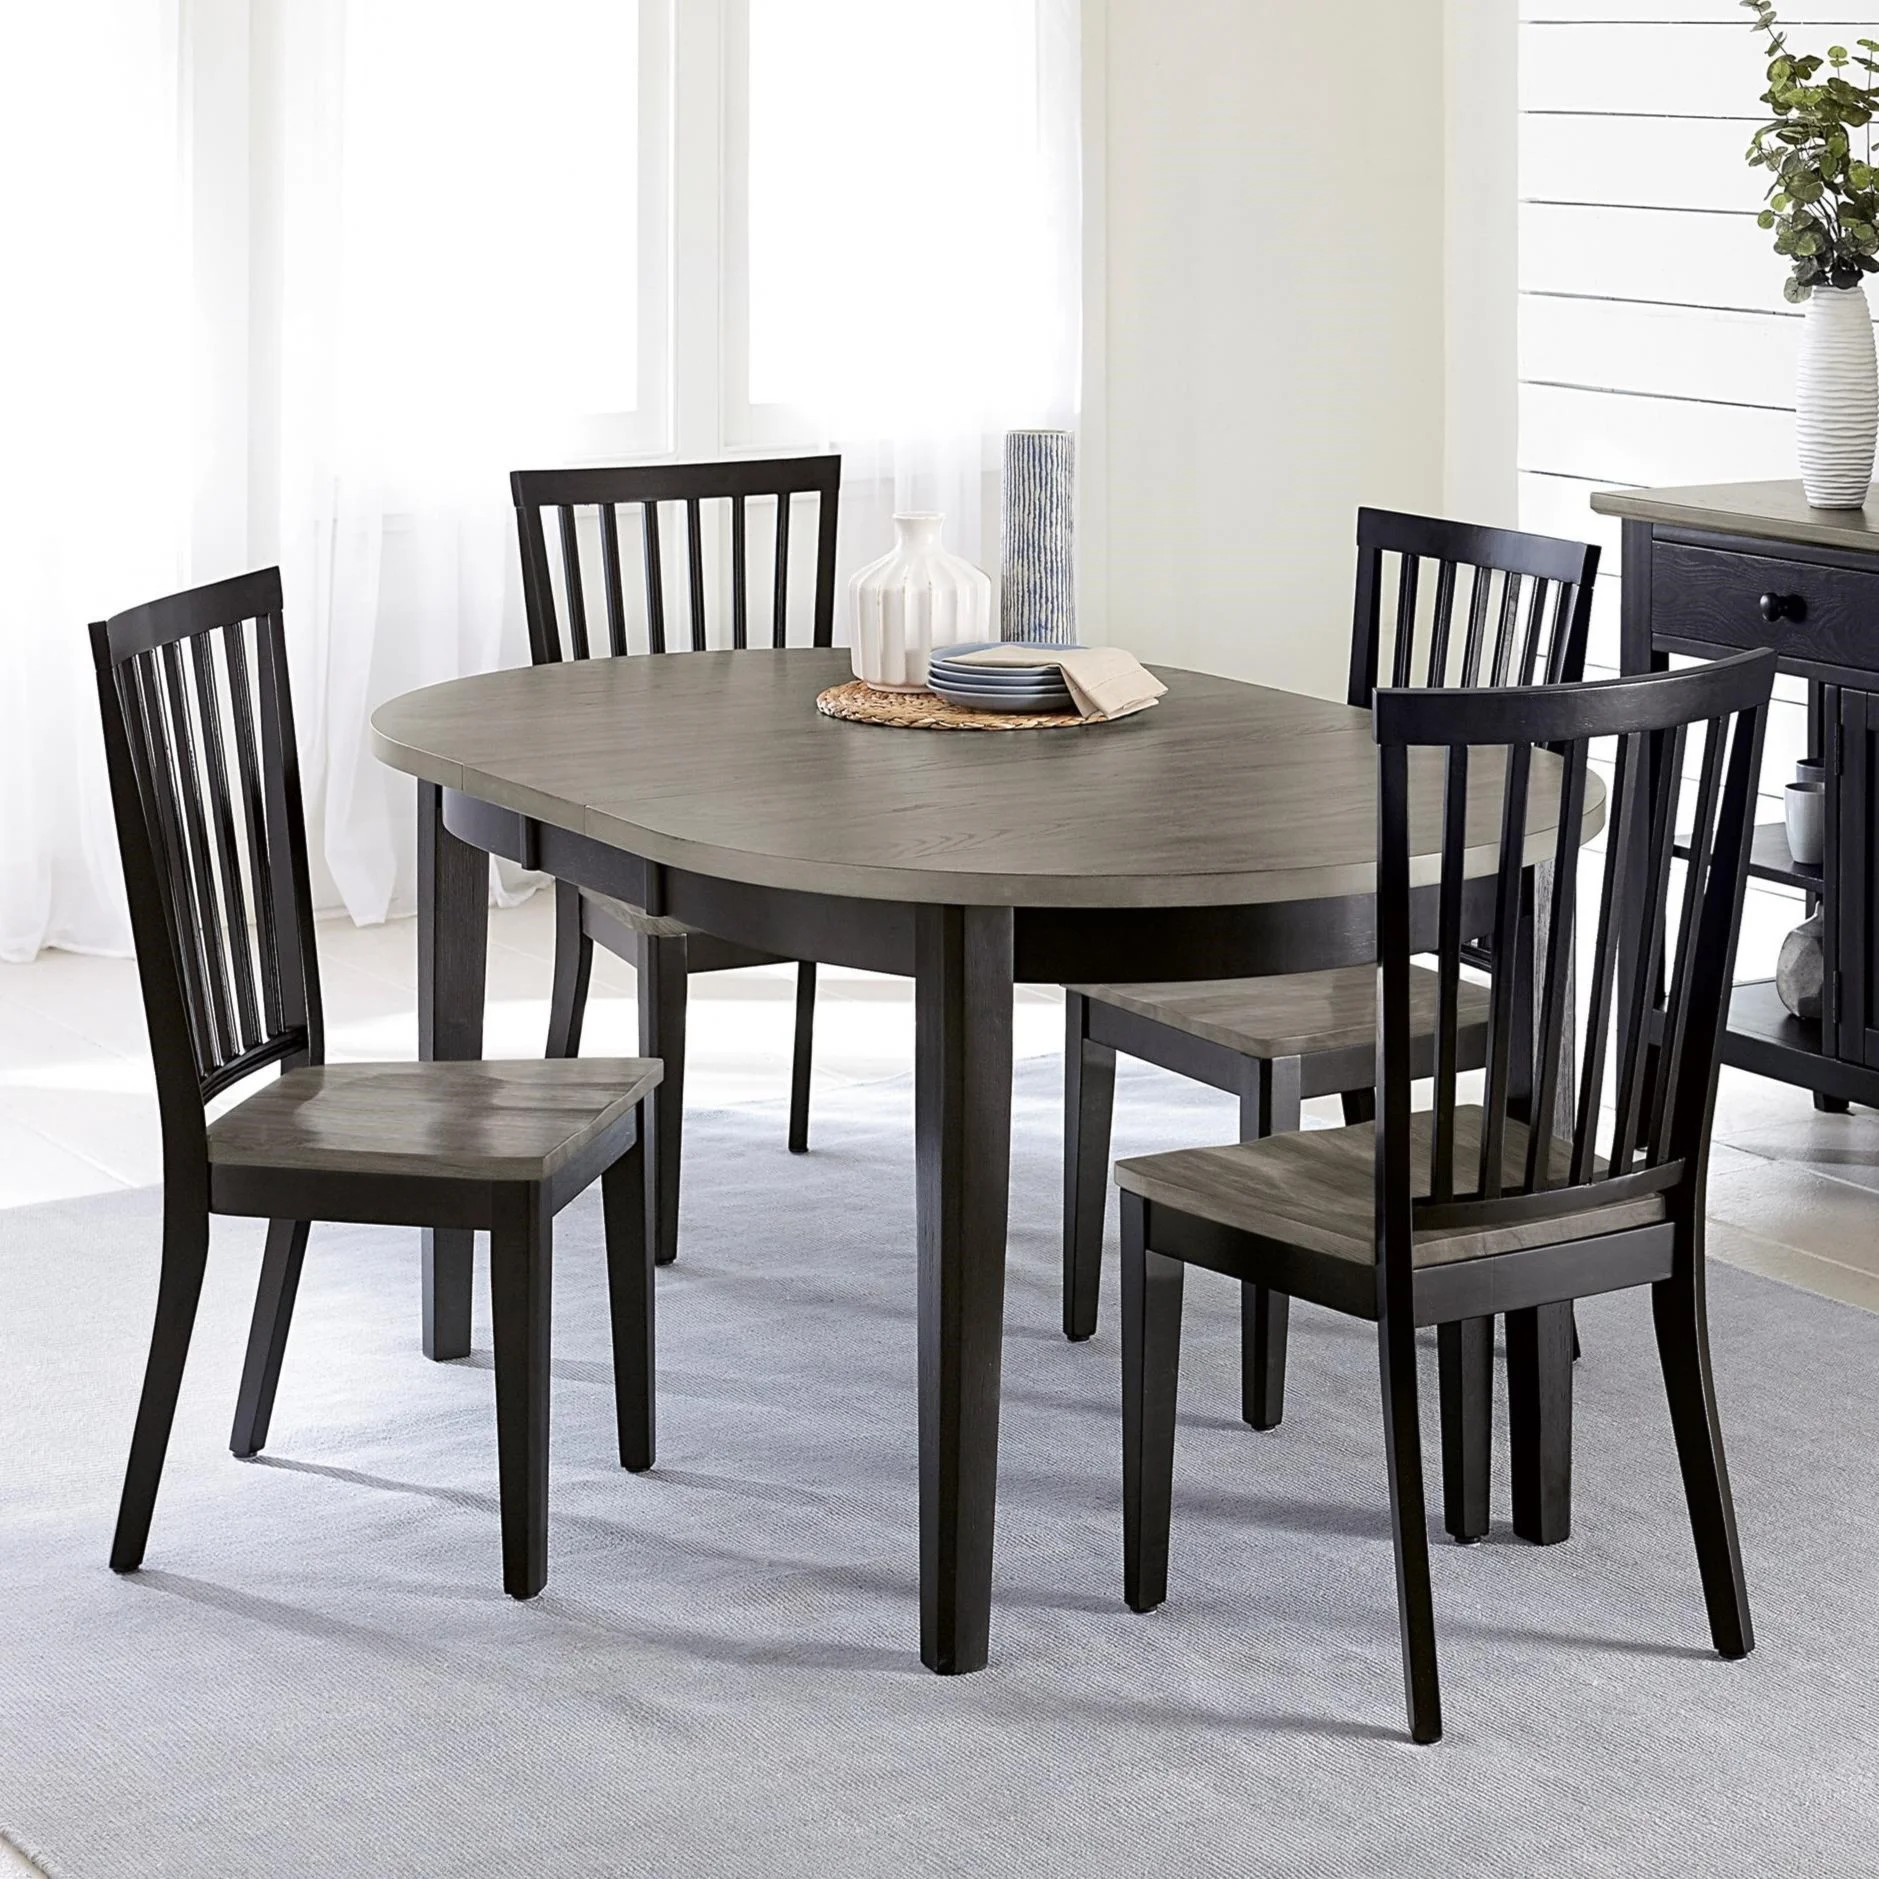 Progressive Furniture Lancaster D883-10+4X61 Casual 5-Piece Dining with Table Chairs | Lindy's Furniture | Dining 5-Piece Sets